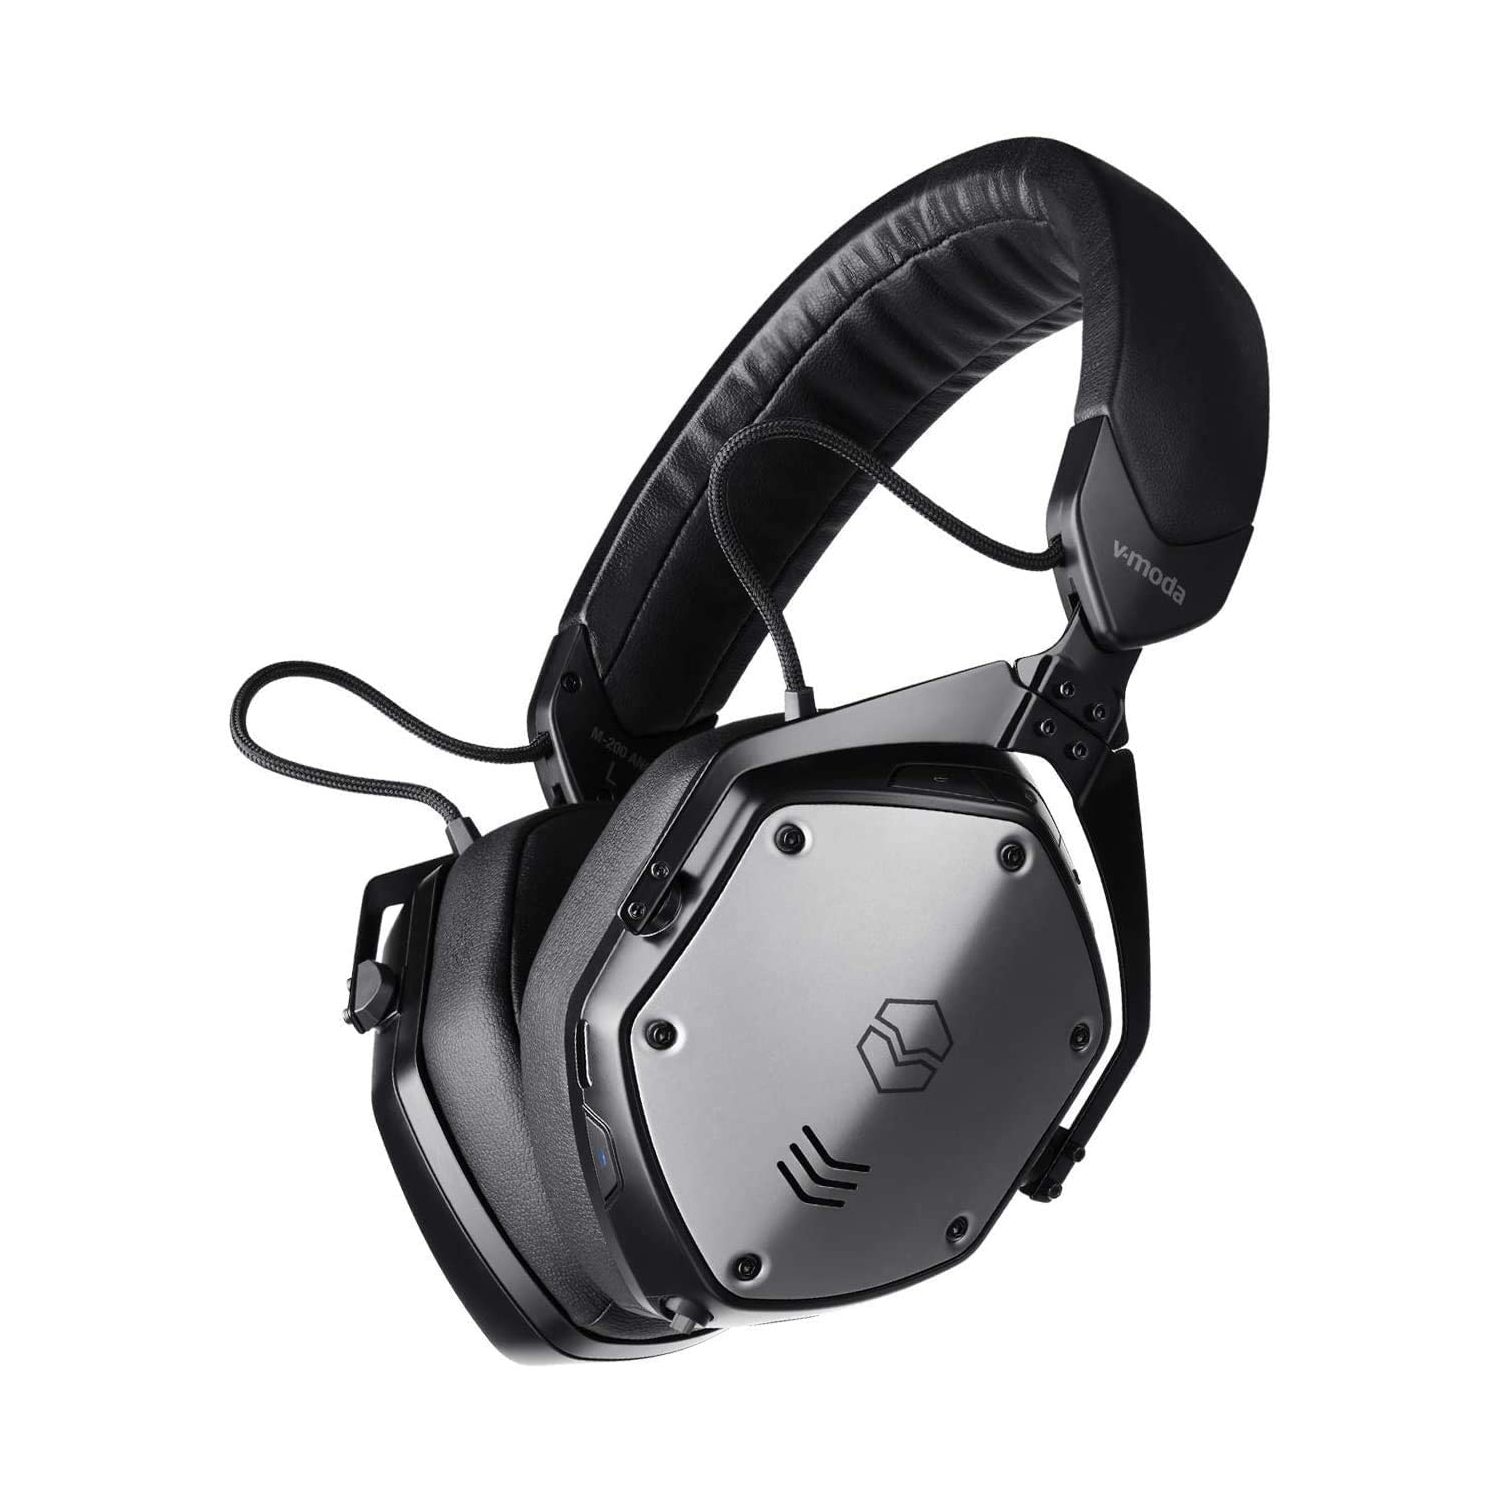 V-MODA M-200 ANC Noise Cancelling Wireless Bluetooth Over-Ear Headphones with Mic for Phone-Call (M-200BTA-BK)